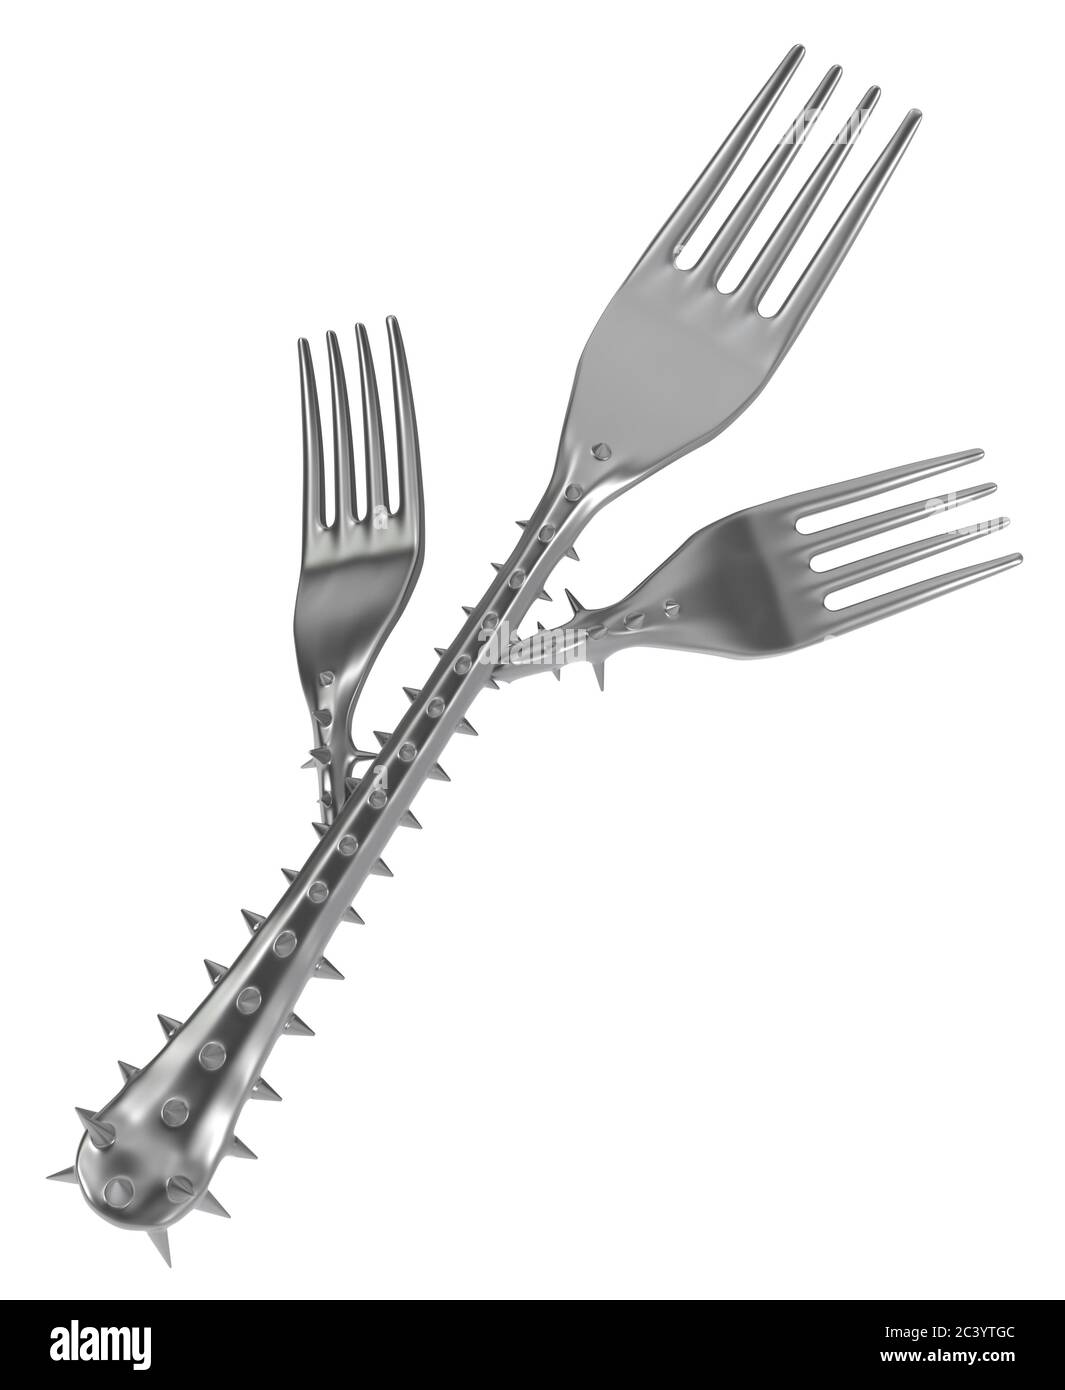 Fork handle covered in sharp spikes two branches, metaphor 3d illustration, horizontal, isolated, over white Stock Photo